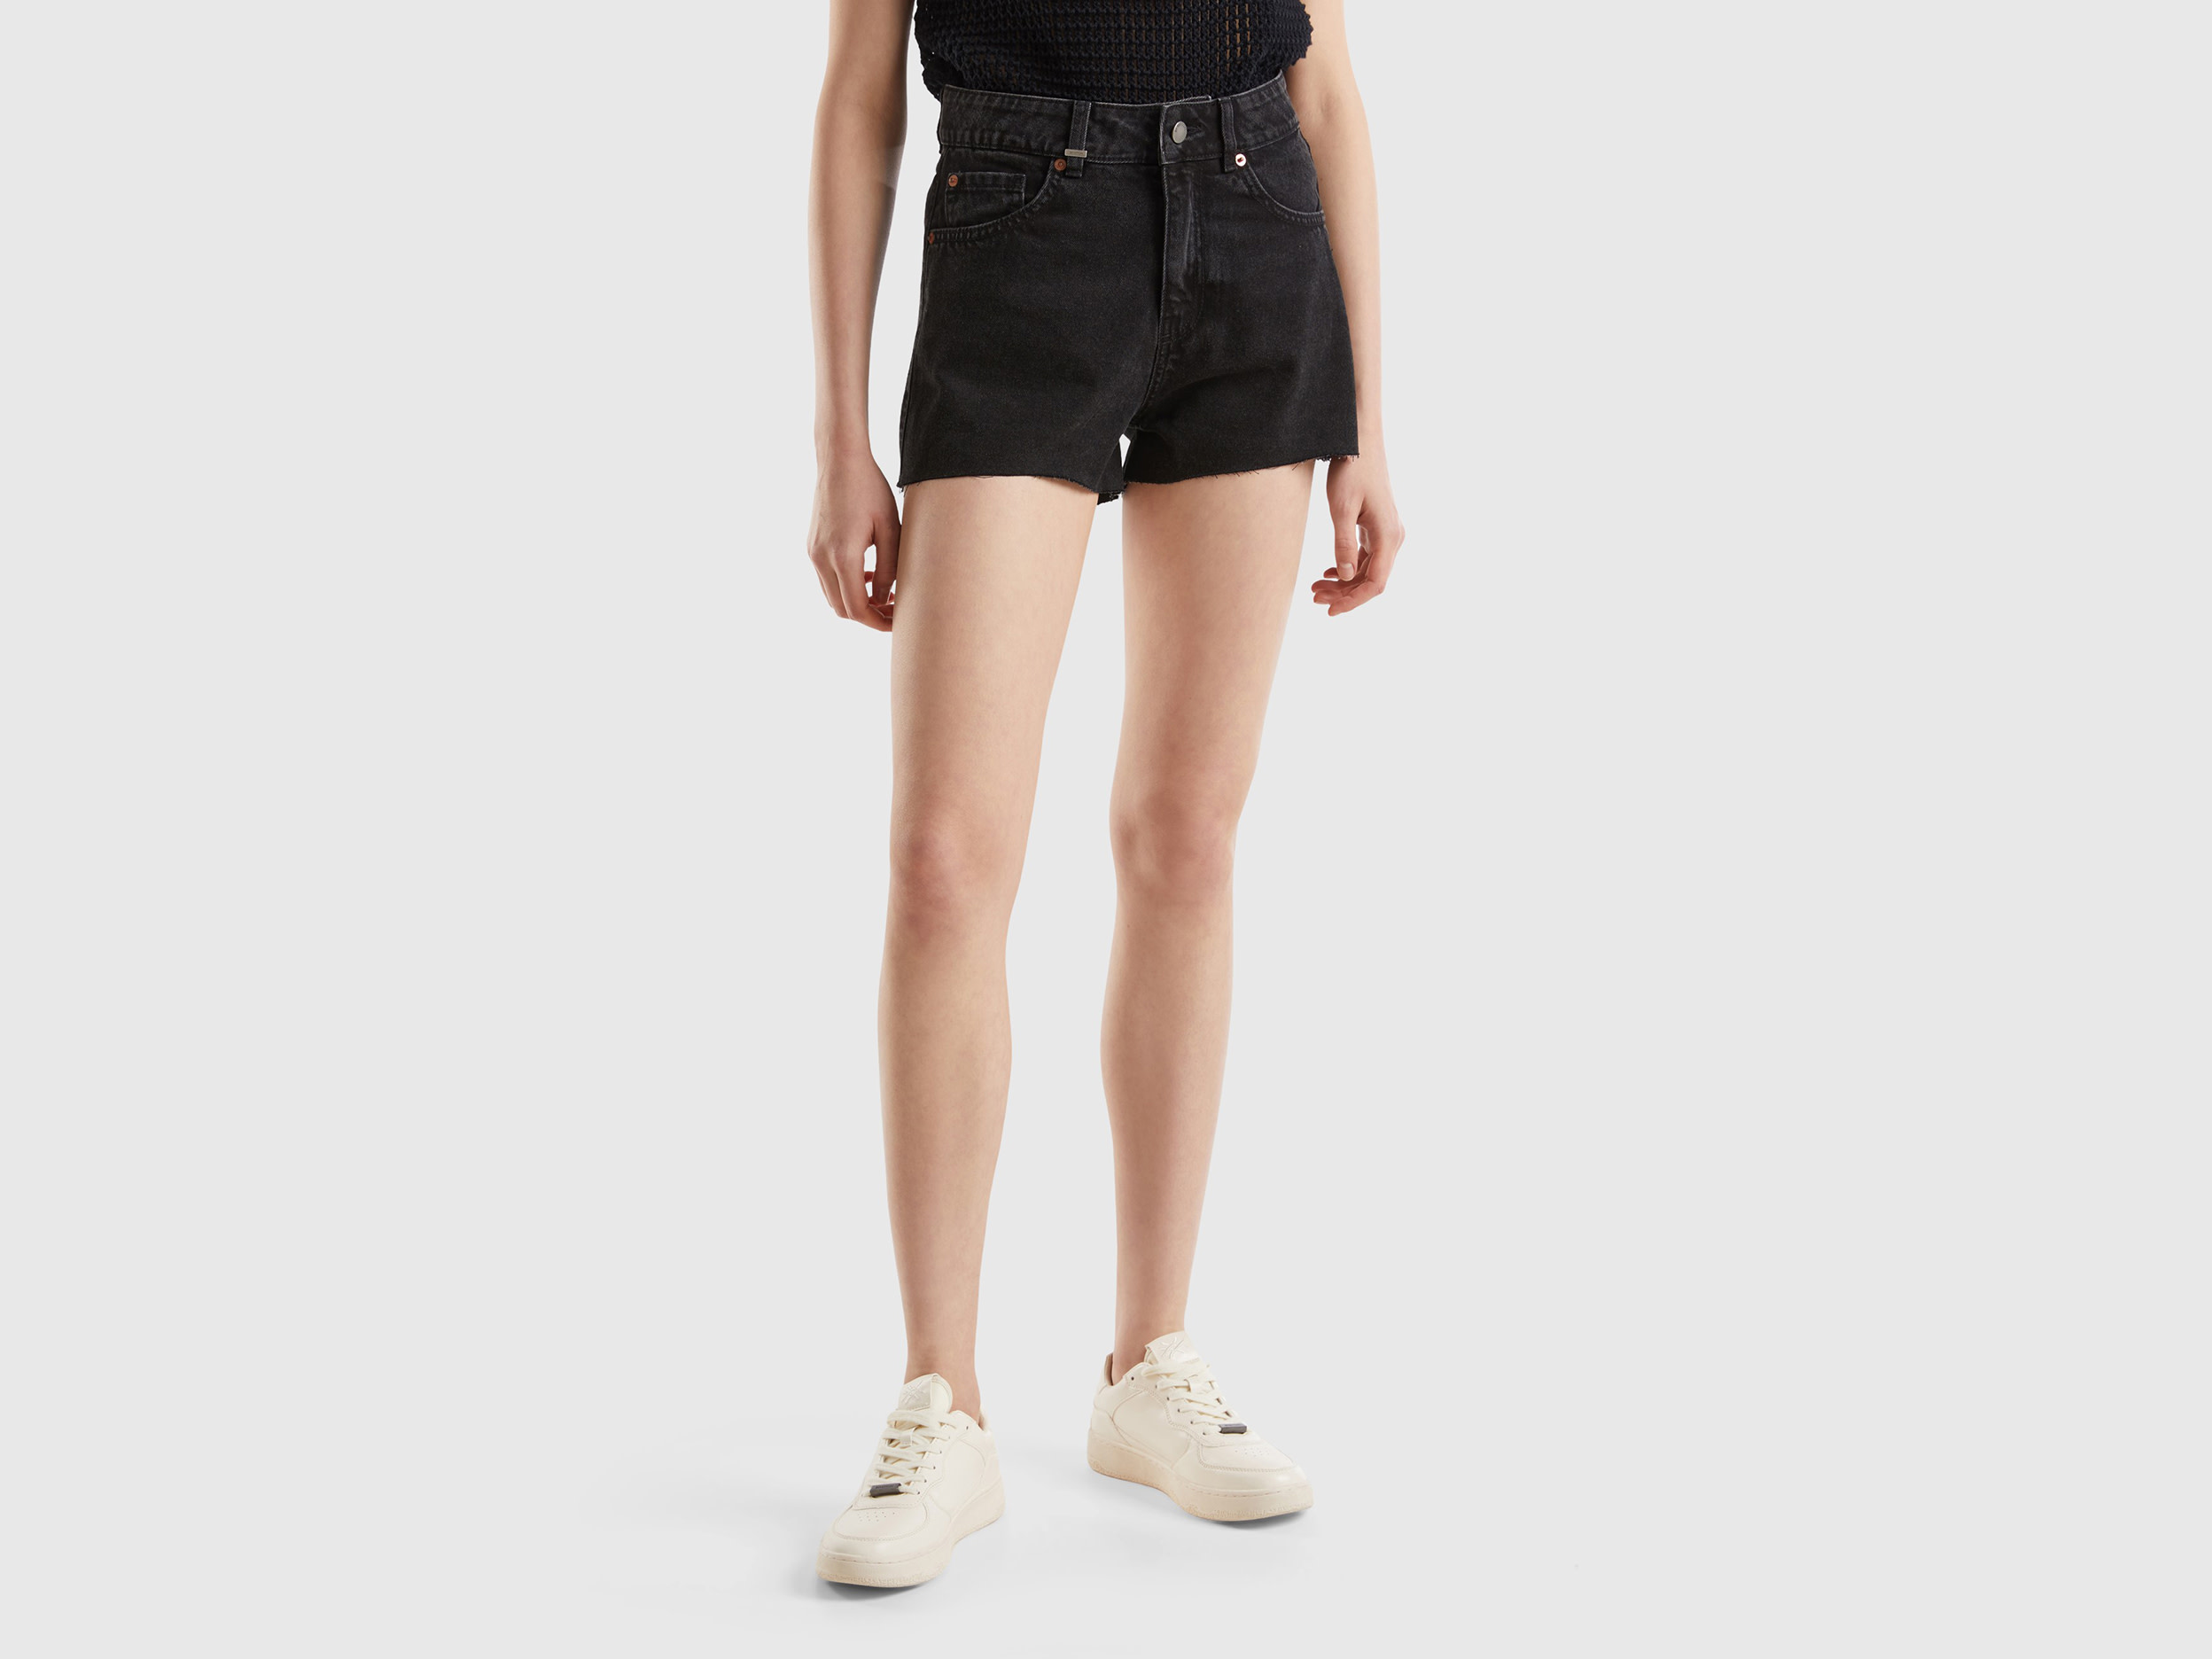 Image of Benetton, Frayed Shorts In Recycled Cotton Blend, size 33, Black, Women